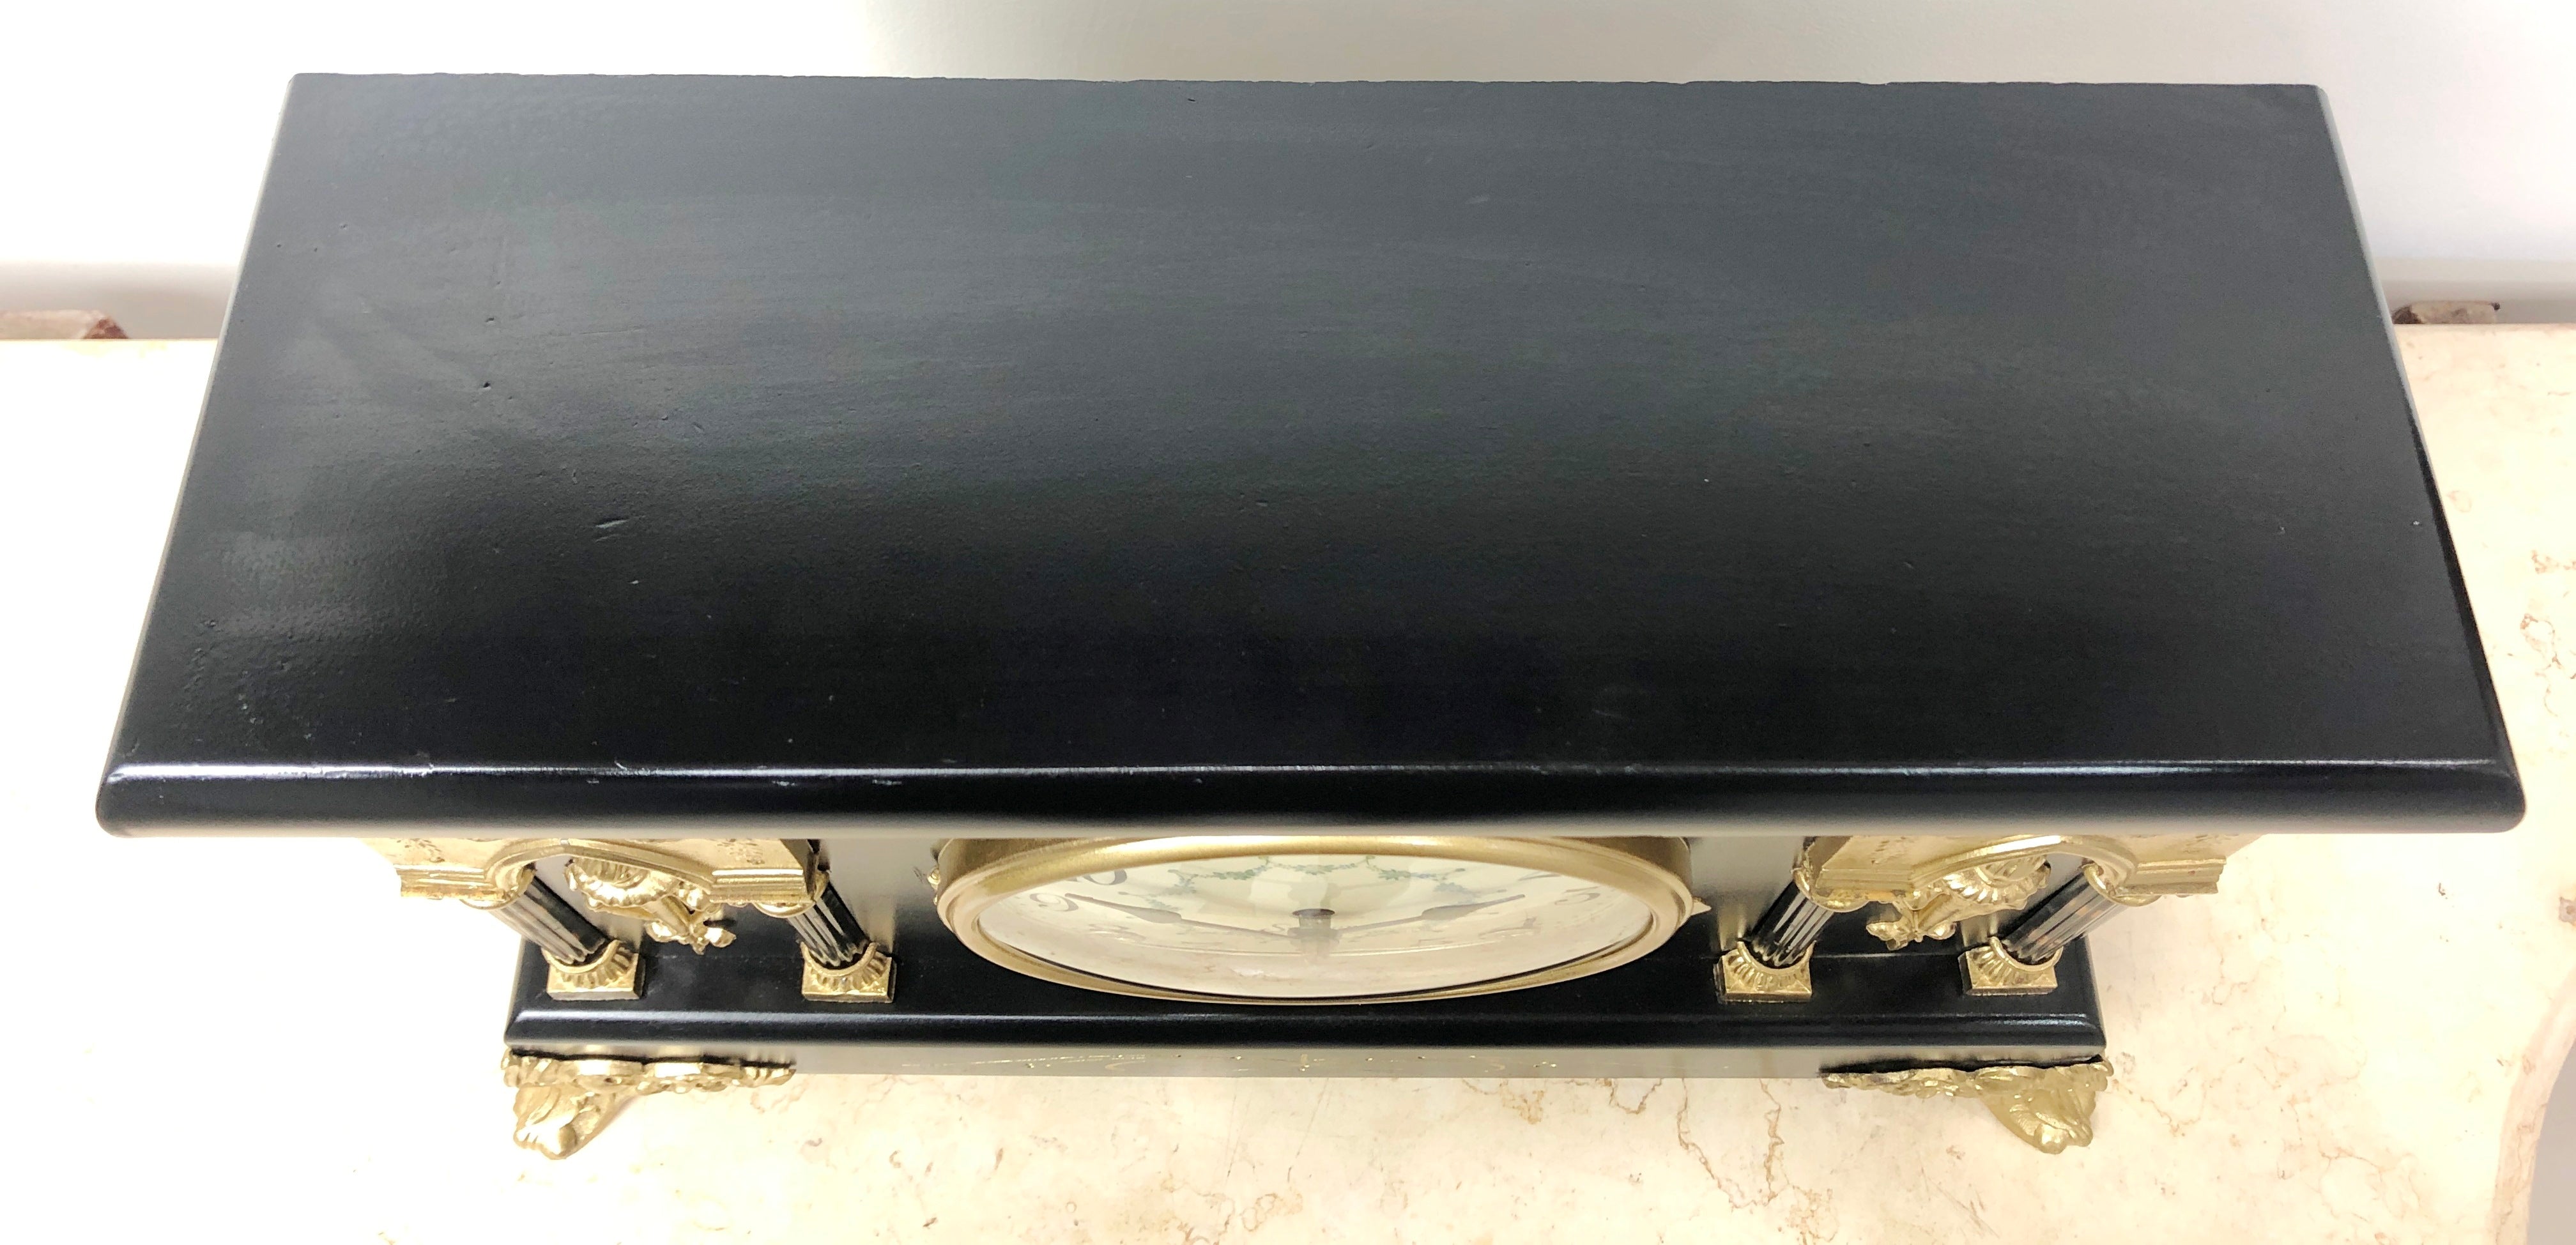 Antique Sessions Hammer Coil Chime Mantel Clock | eXibit collection